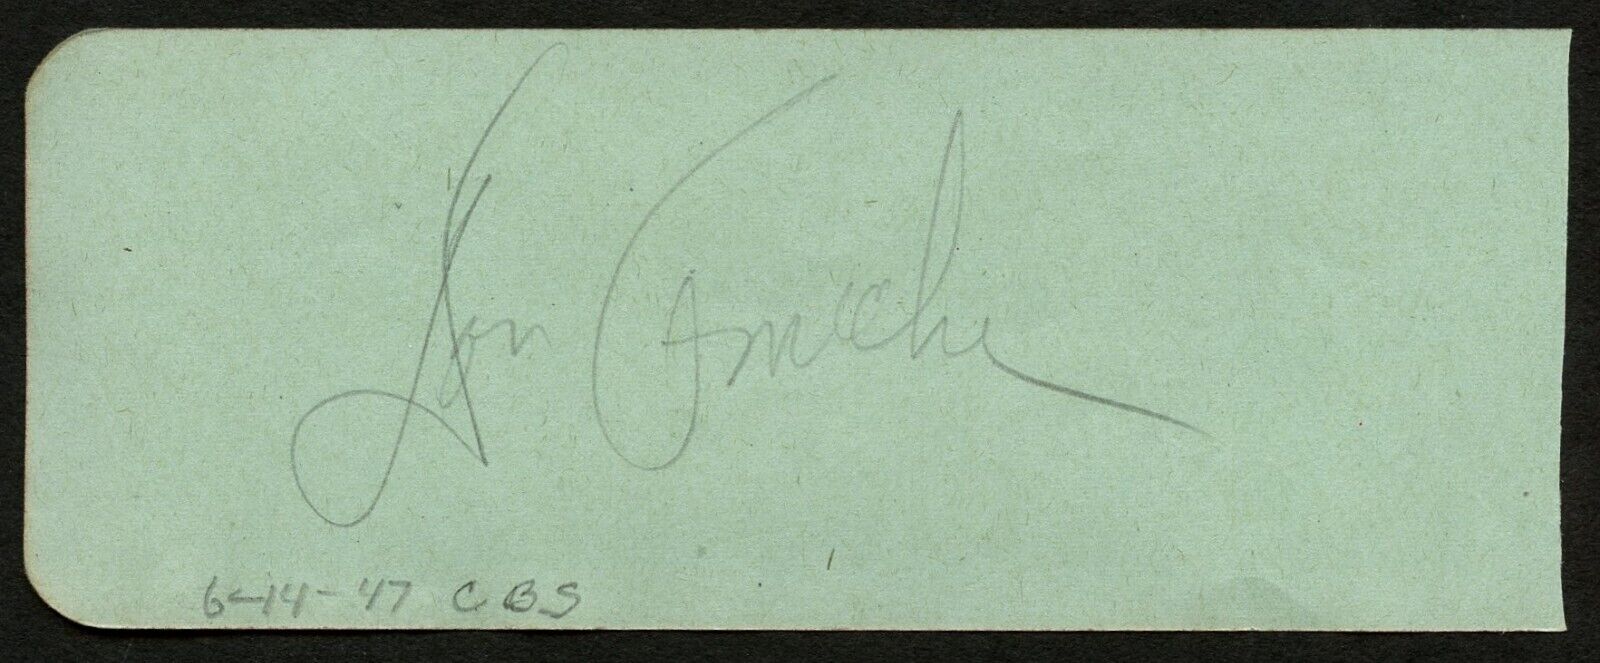 Don Ameche d1993 and Alexis Smith d1993 signed 2x5 cut autograph auto in 1947